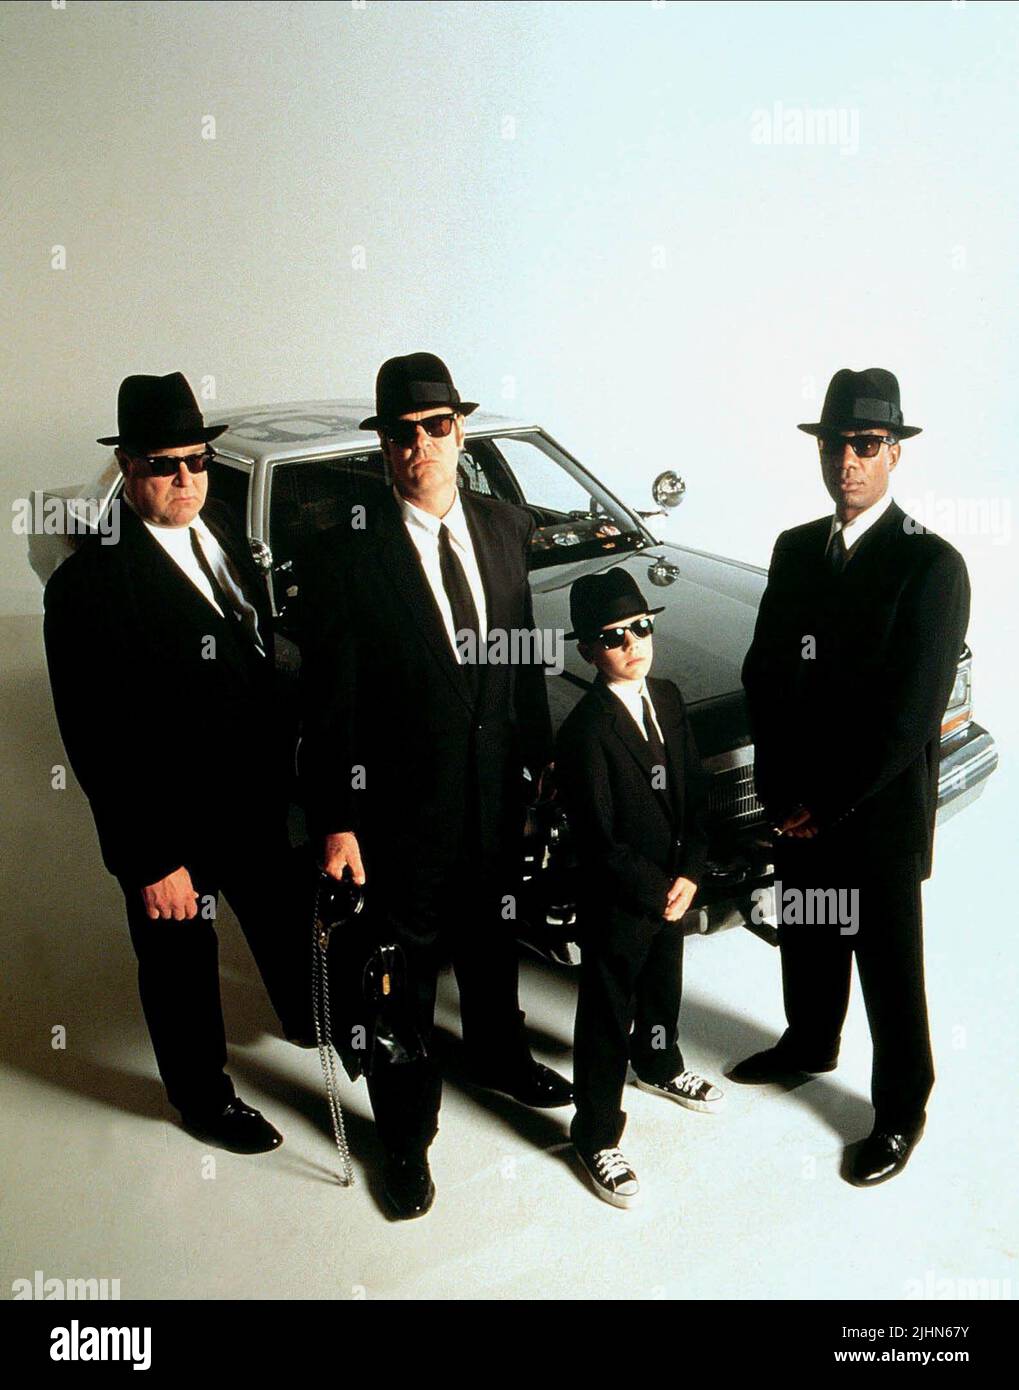 The Blues Brothers”: An icon of vehicular mayhem turns 40